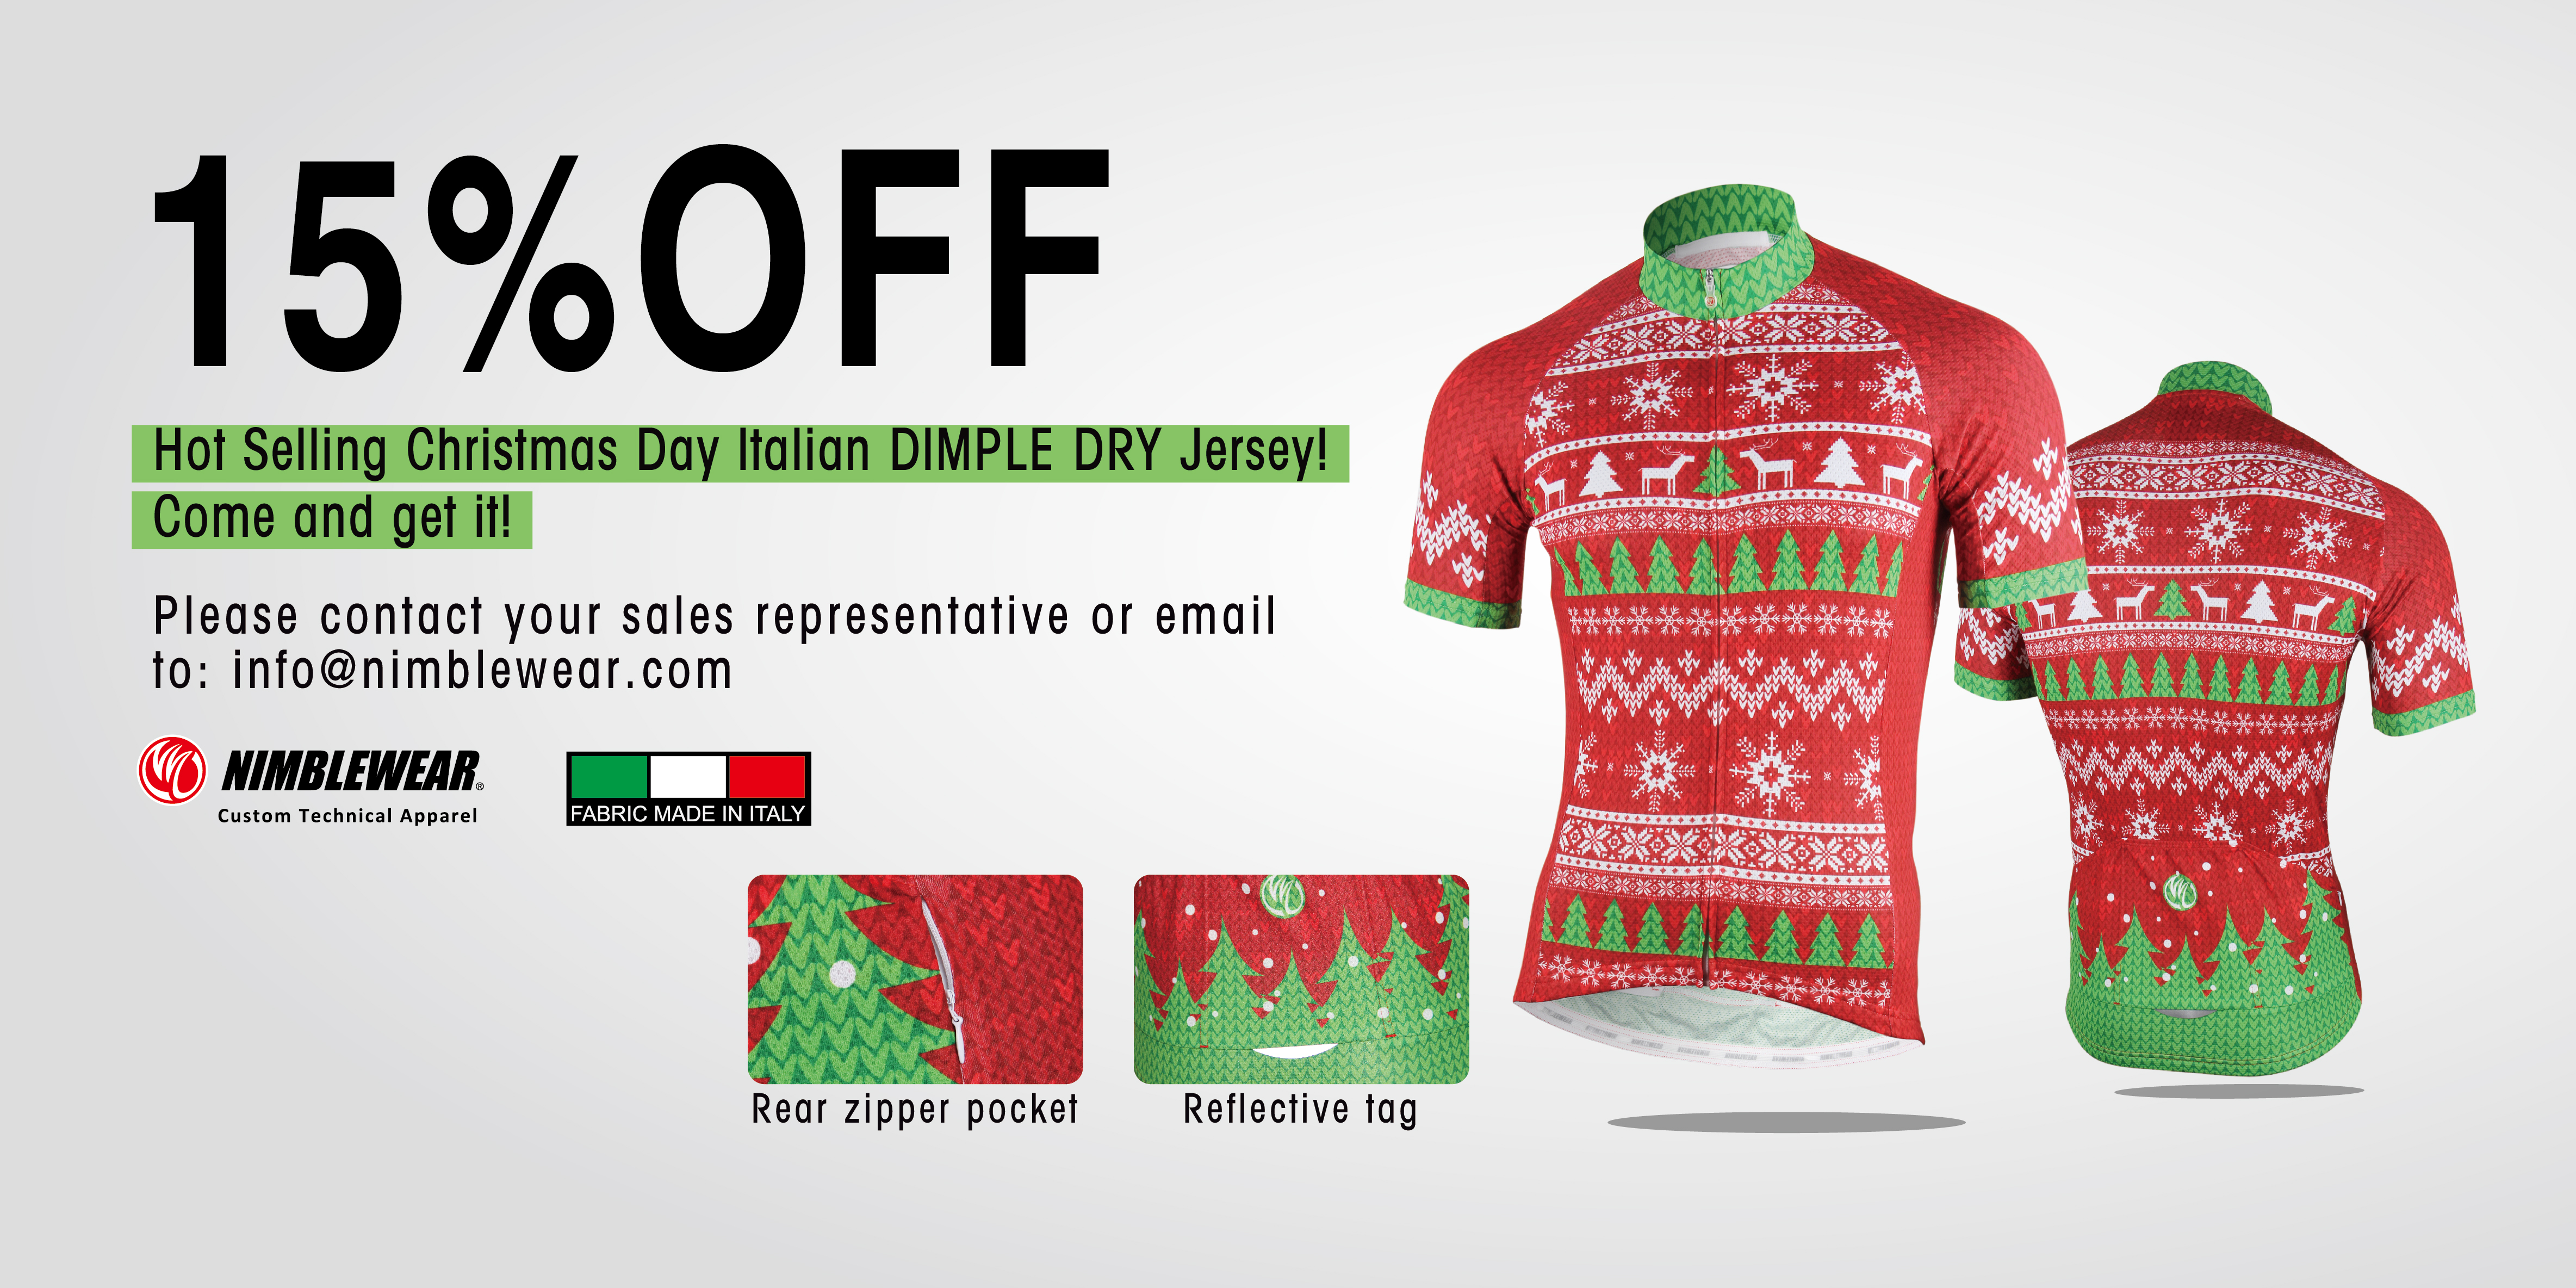 15%OFF for Christmas Italian Dimple Dry Cycling Jersey